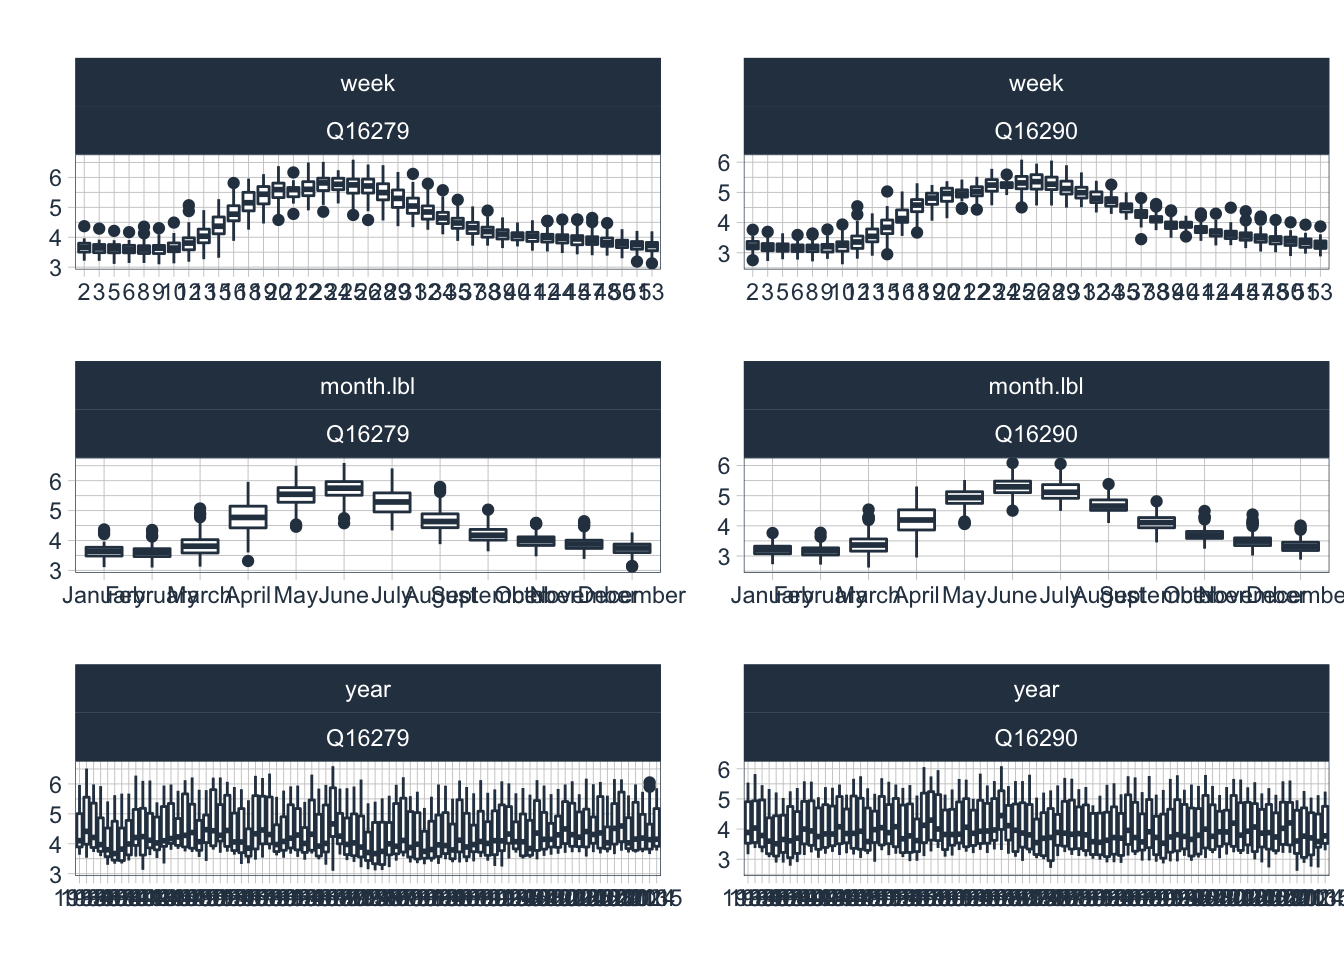 Seasonal diagnostics of log1p discharge. Weekly (top row), monthly (middle row) and yearly diagnostics (bottom row) are shown for the two discharge time series.